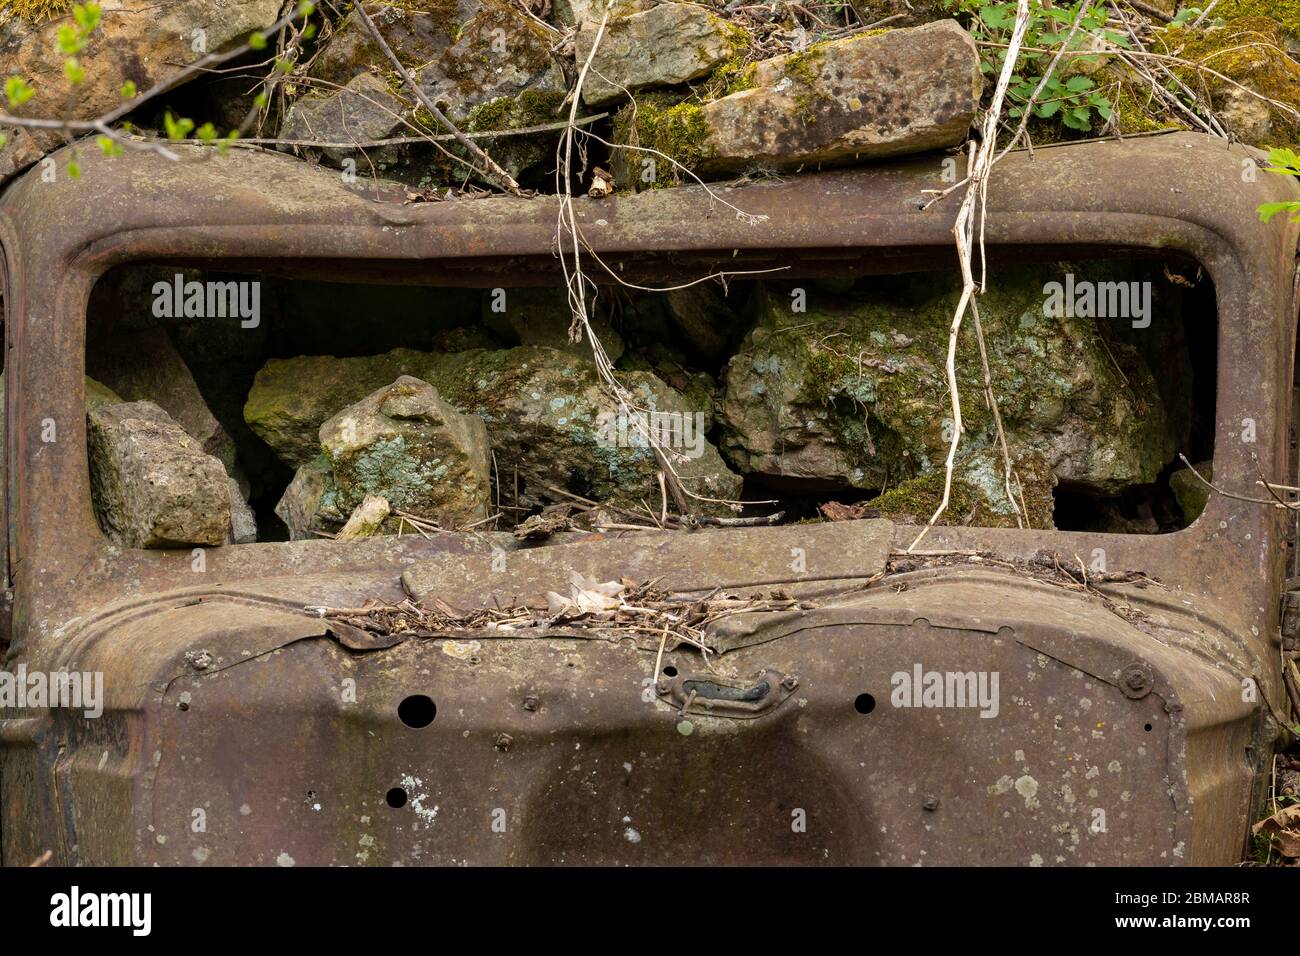 Old Cars Buried For Erosion Control Stock Photo